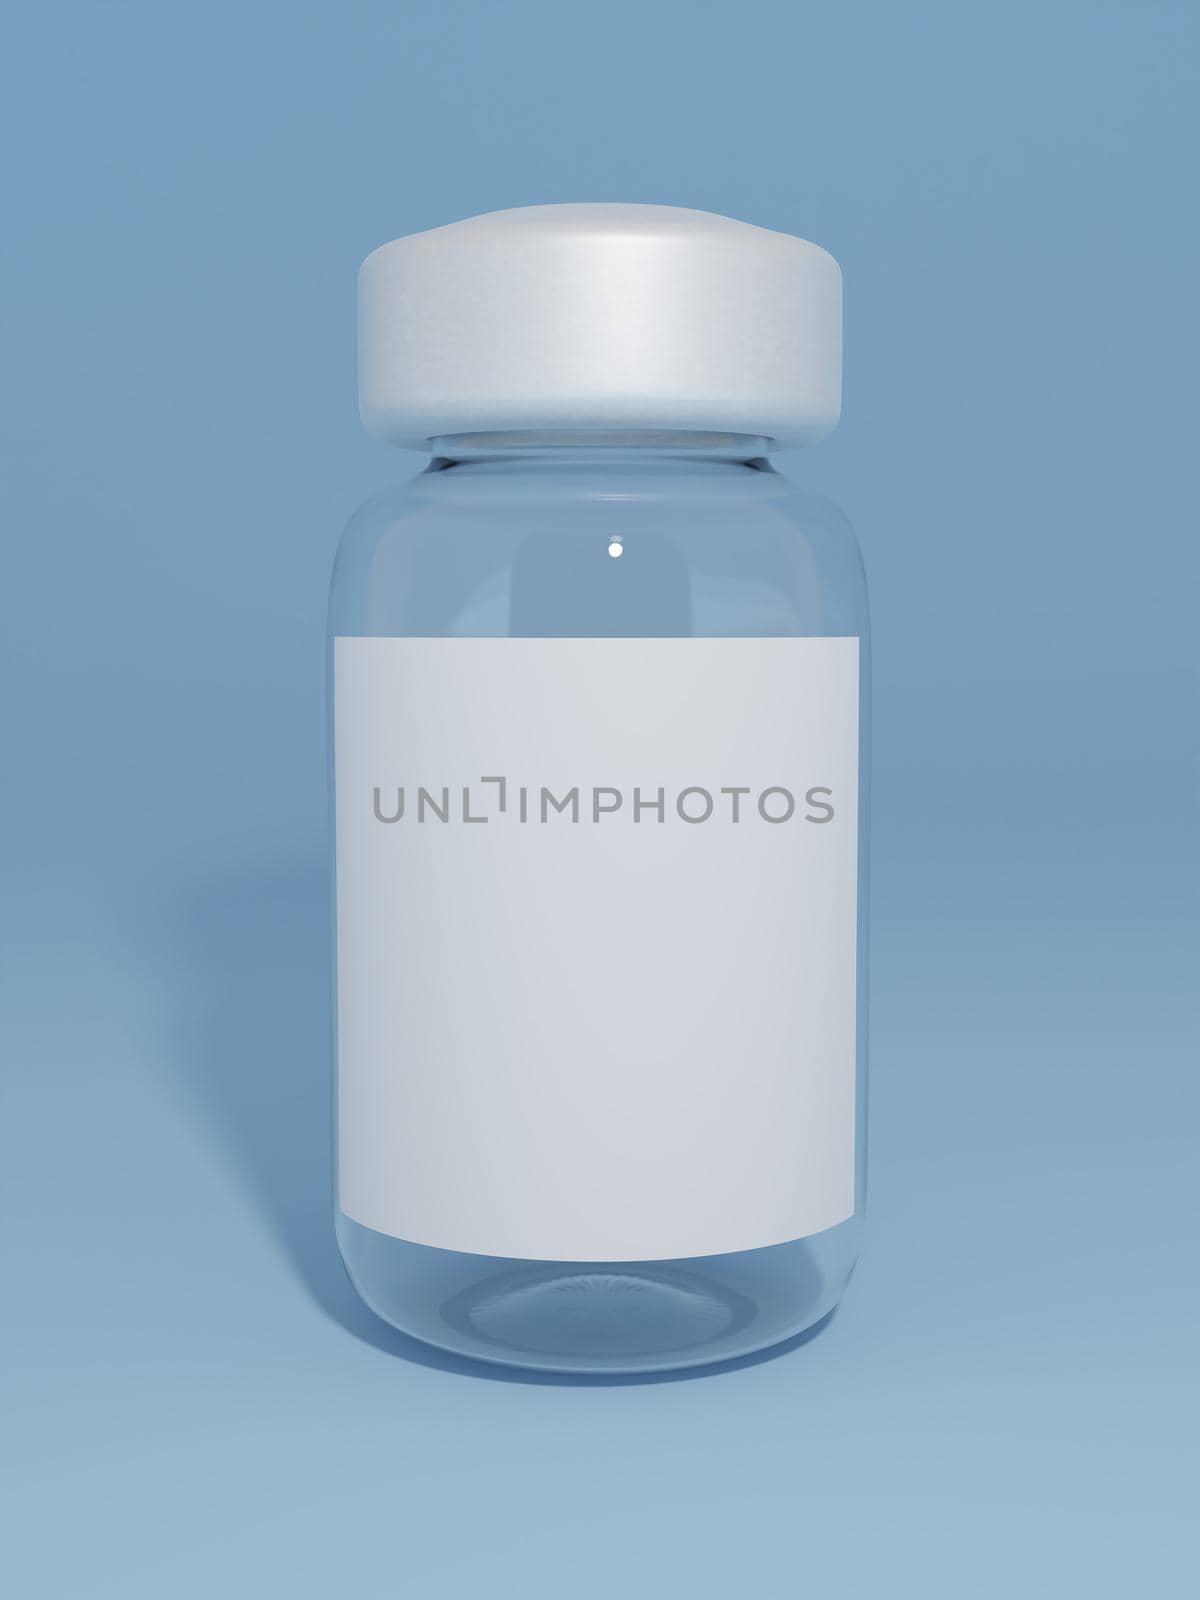 mockup of a vaccine vial by asolano